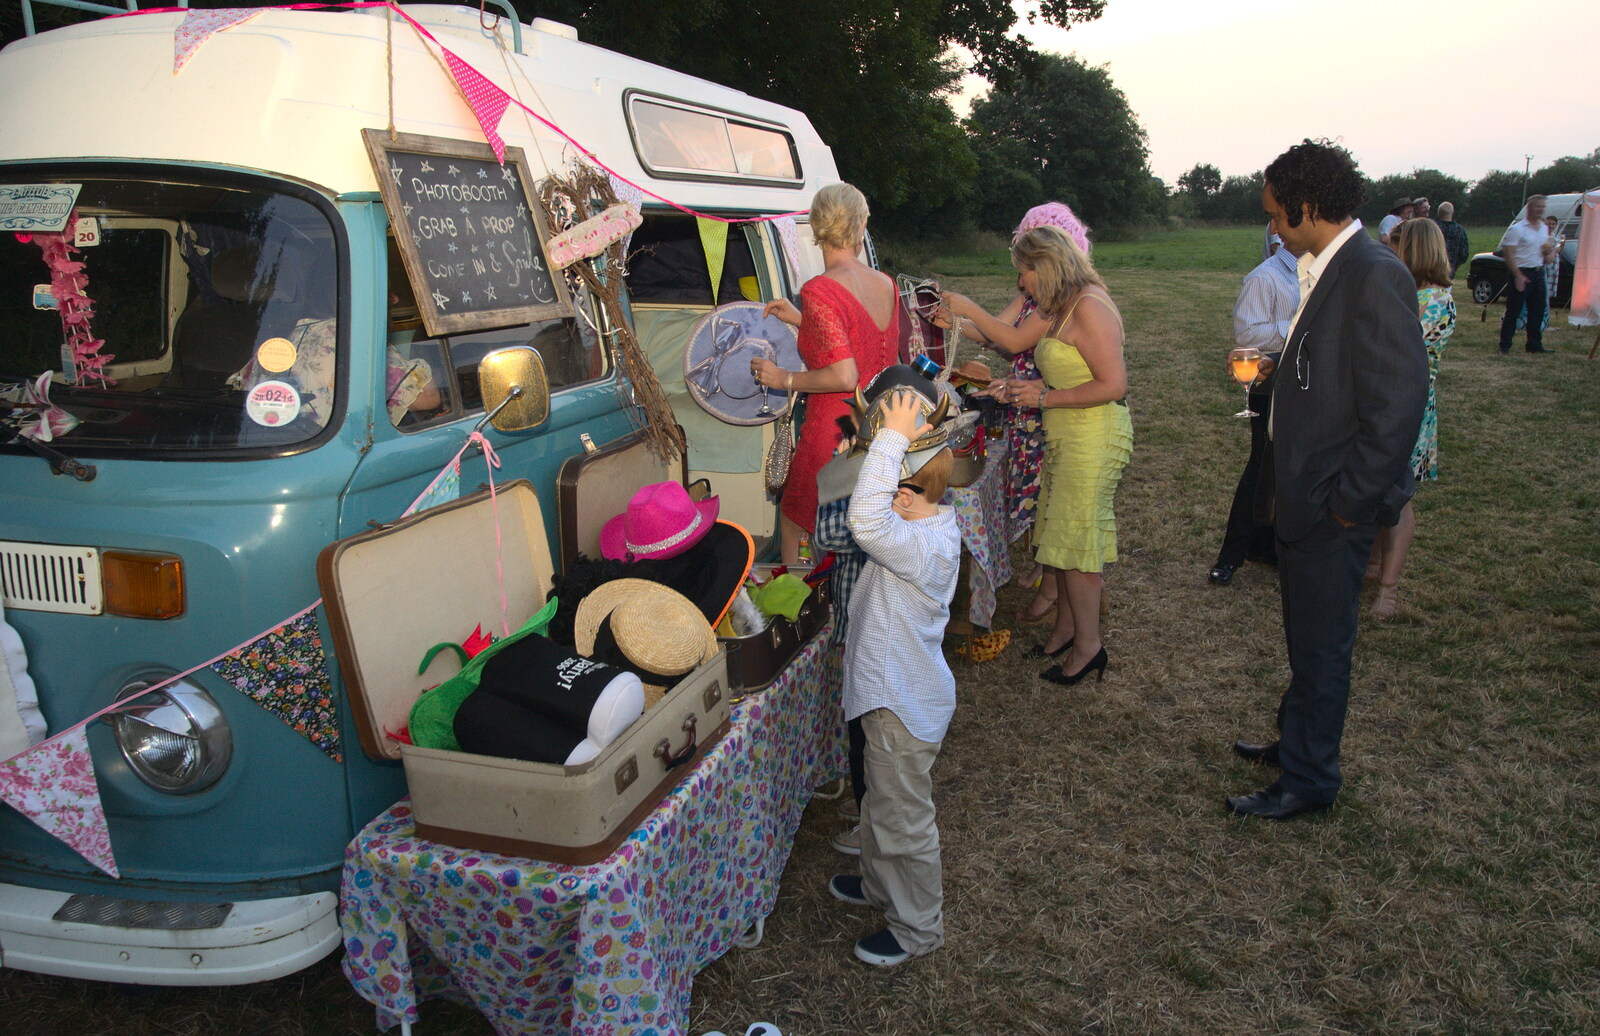 A VW campervan does fancy dress from The BBs Play Steph's Wedding, Burston, Norfolk - 13th July 2013